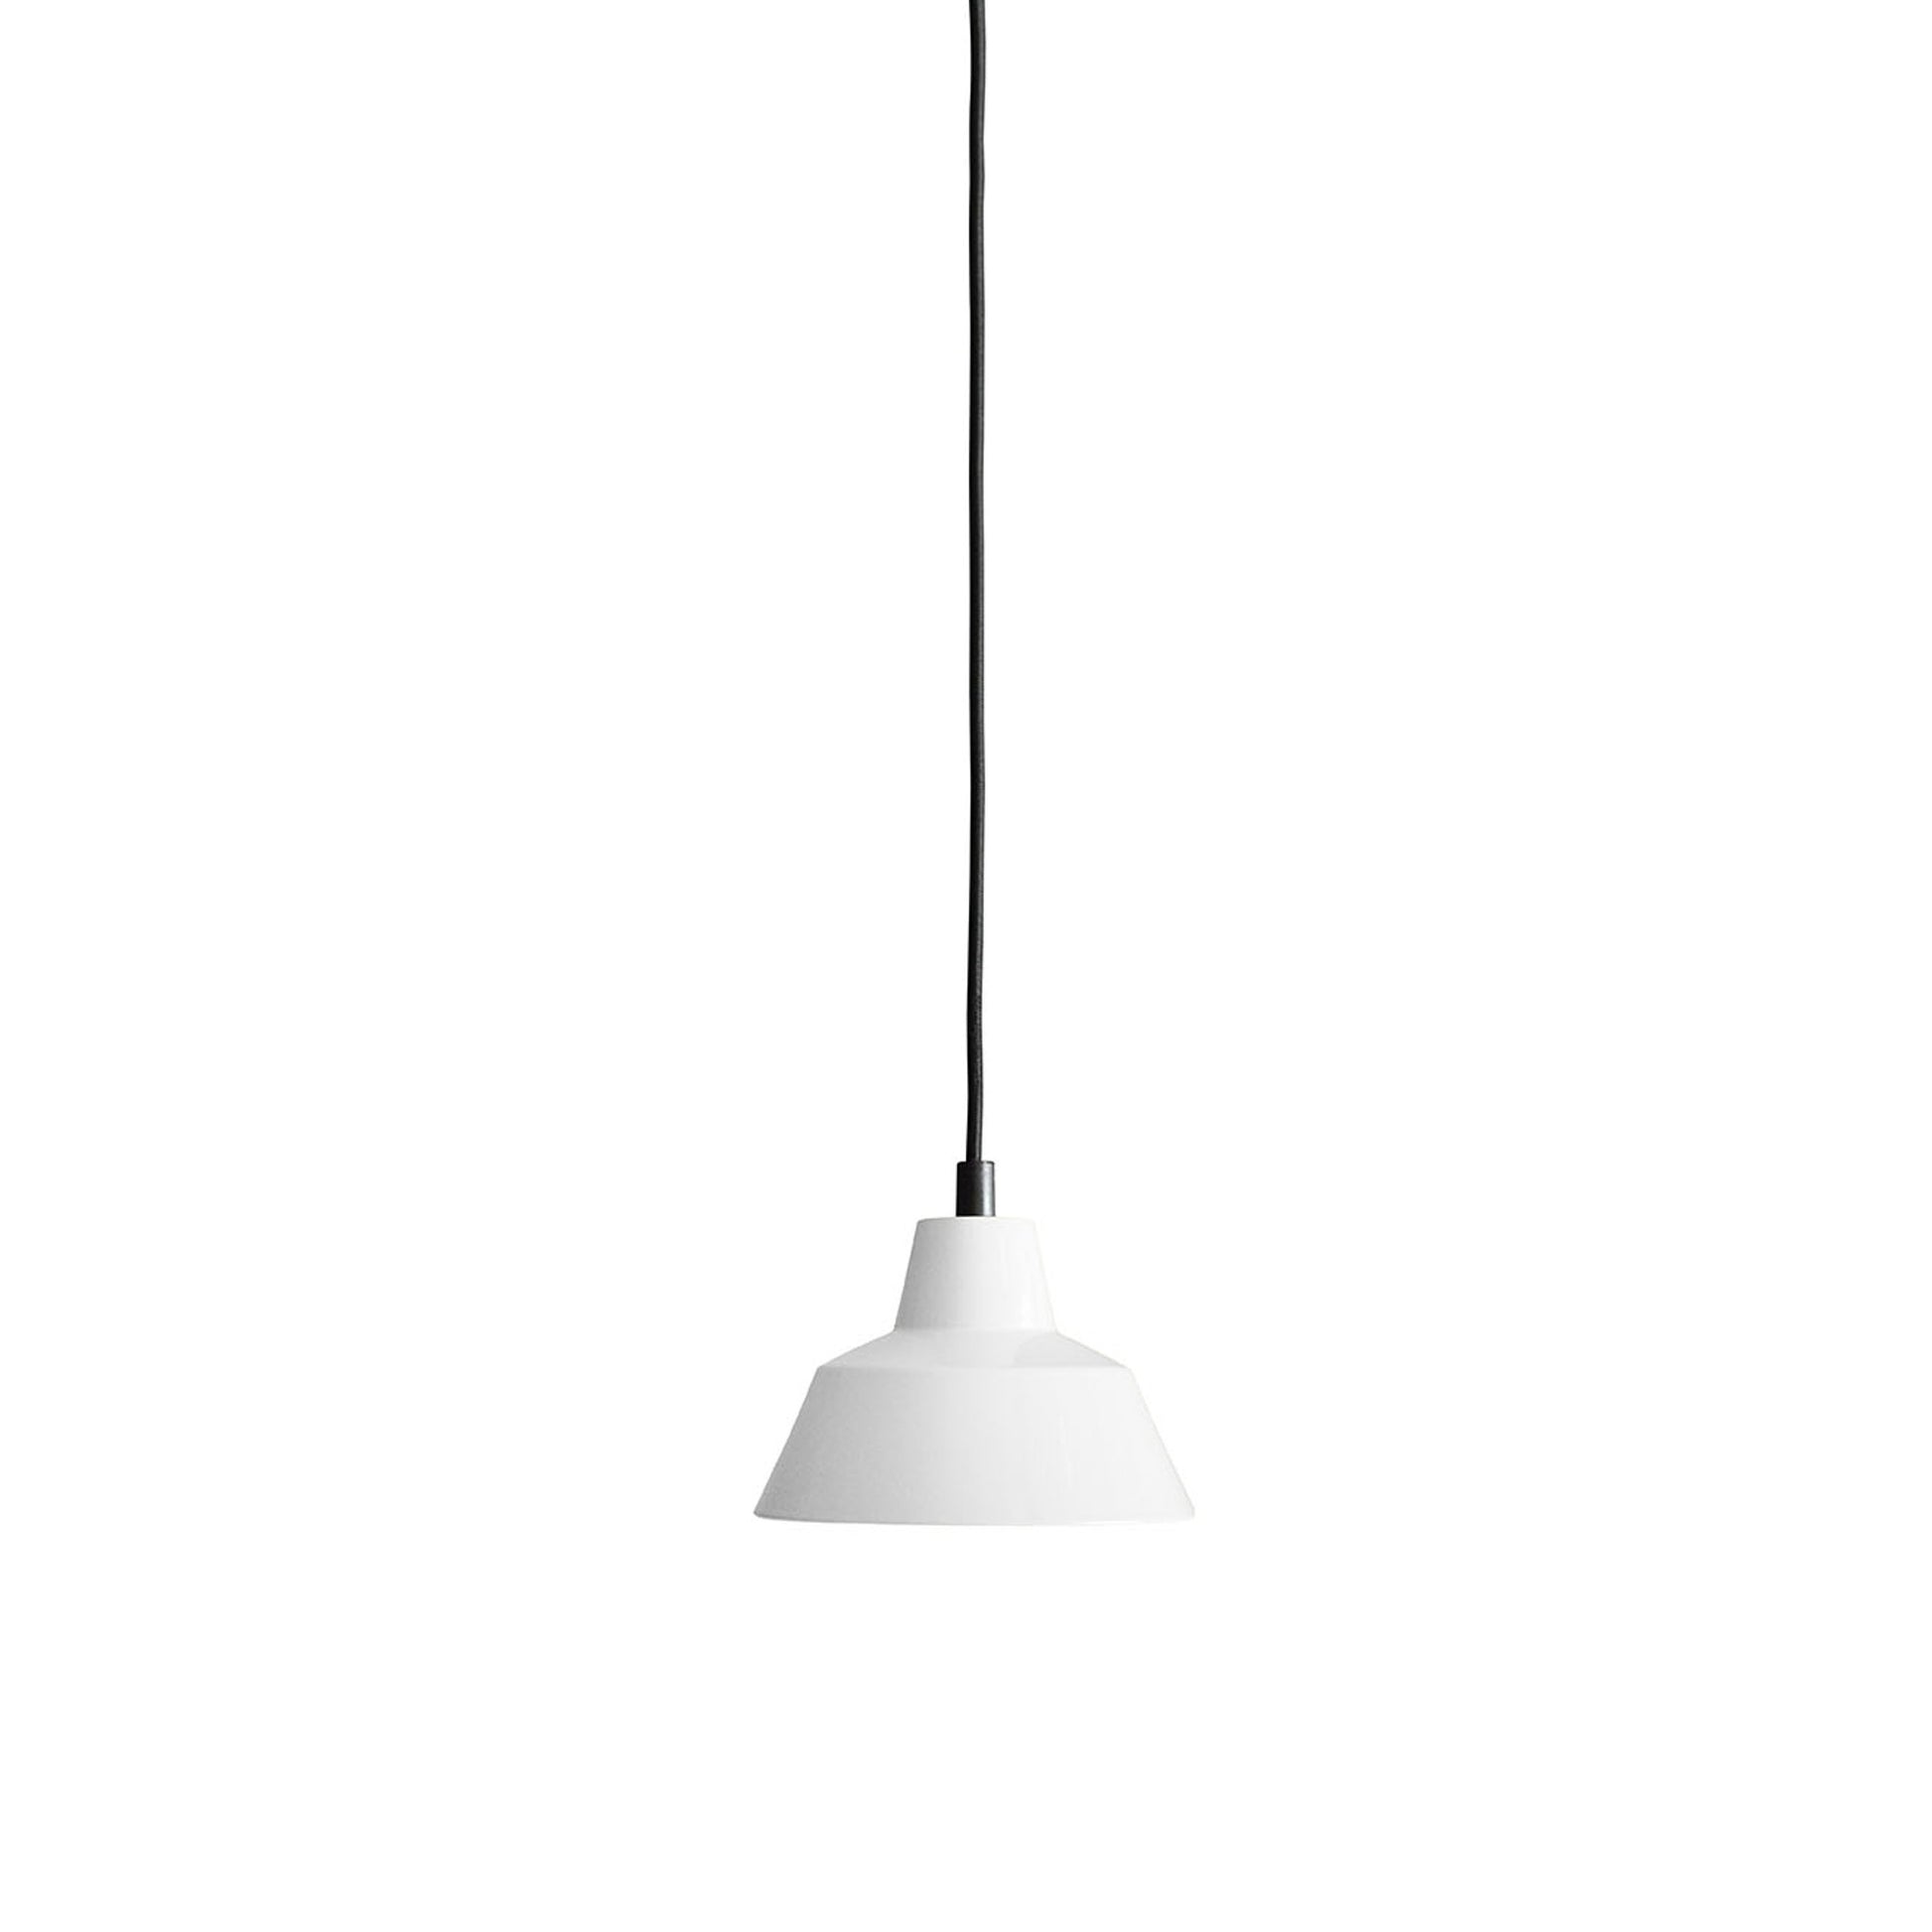 Workshop Lamp Pendant Lamp W1 by Made By Hand #Mat White